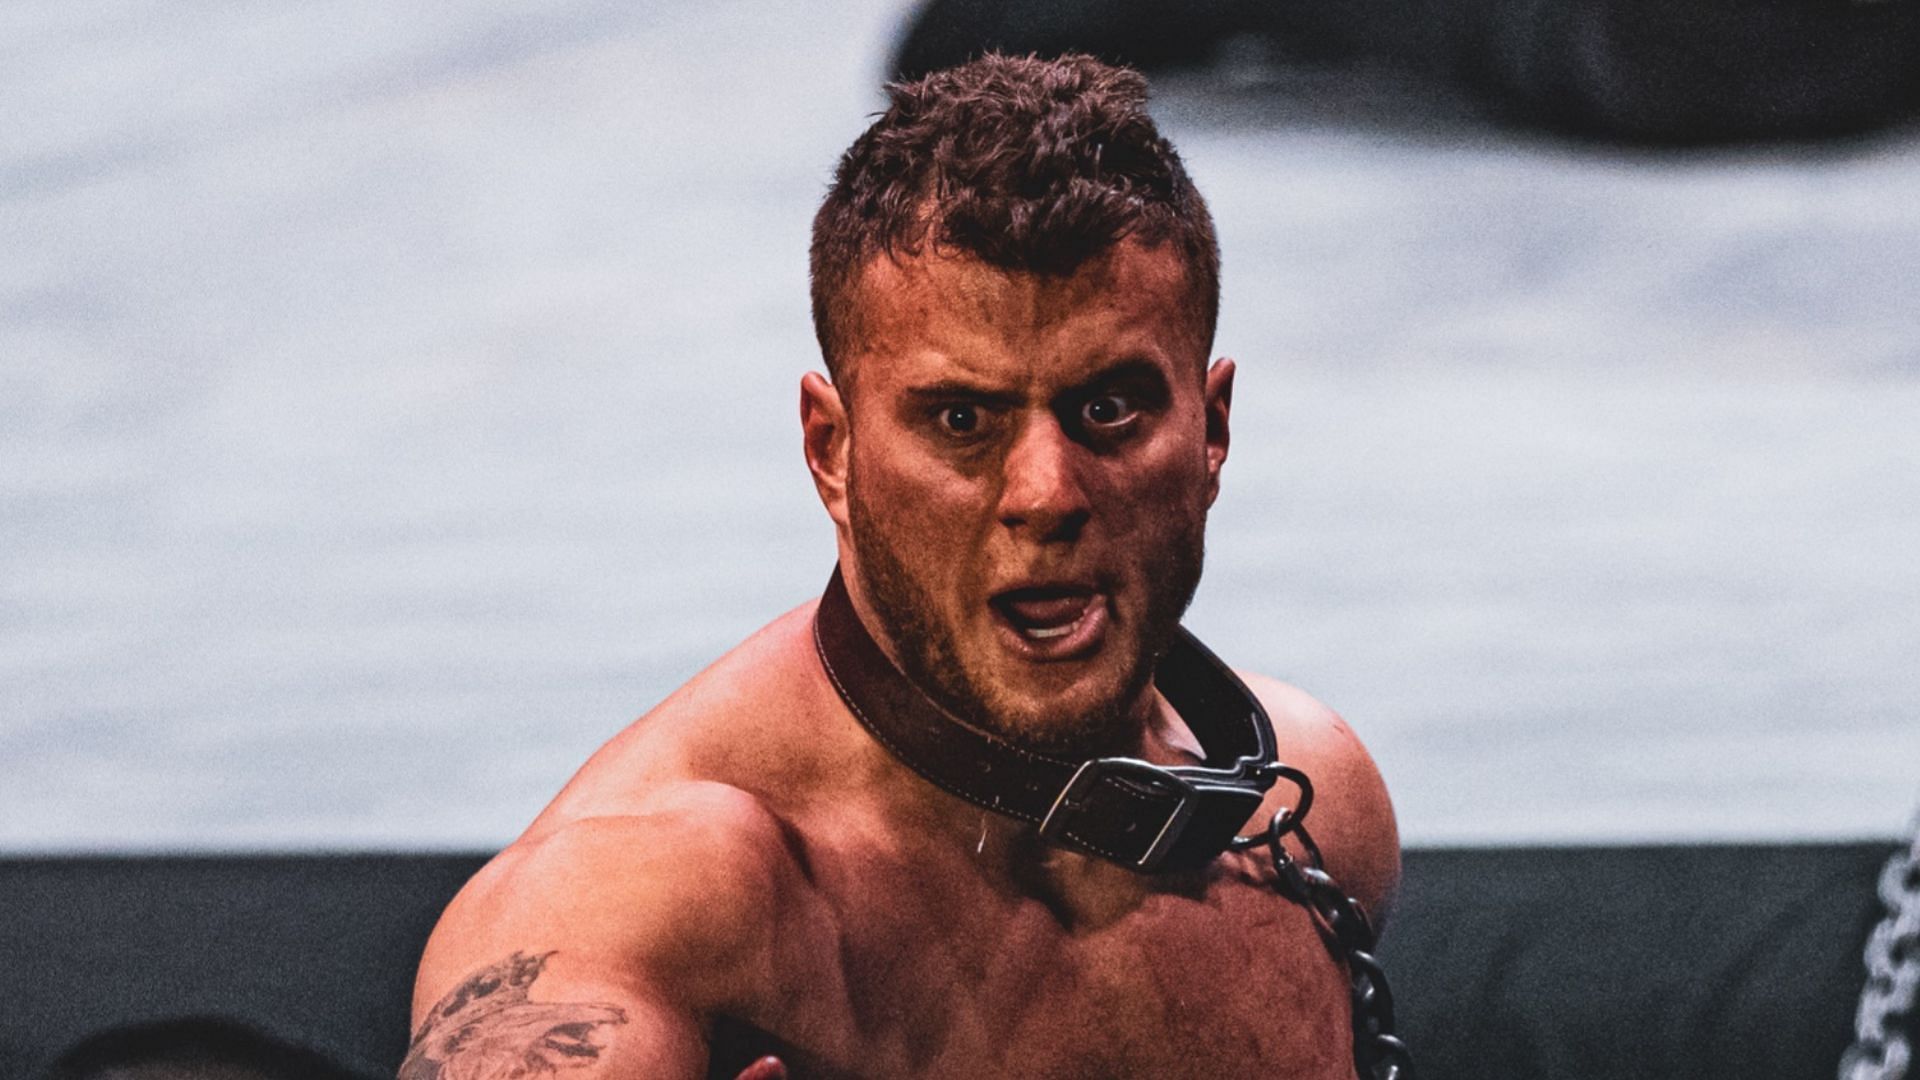 MJF at AEW Revolution 2022 (credit: Jay Lee Photography)